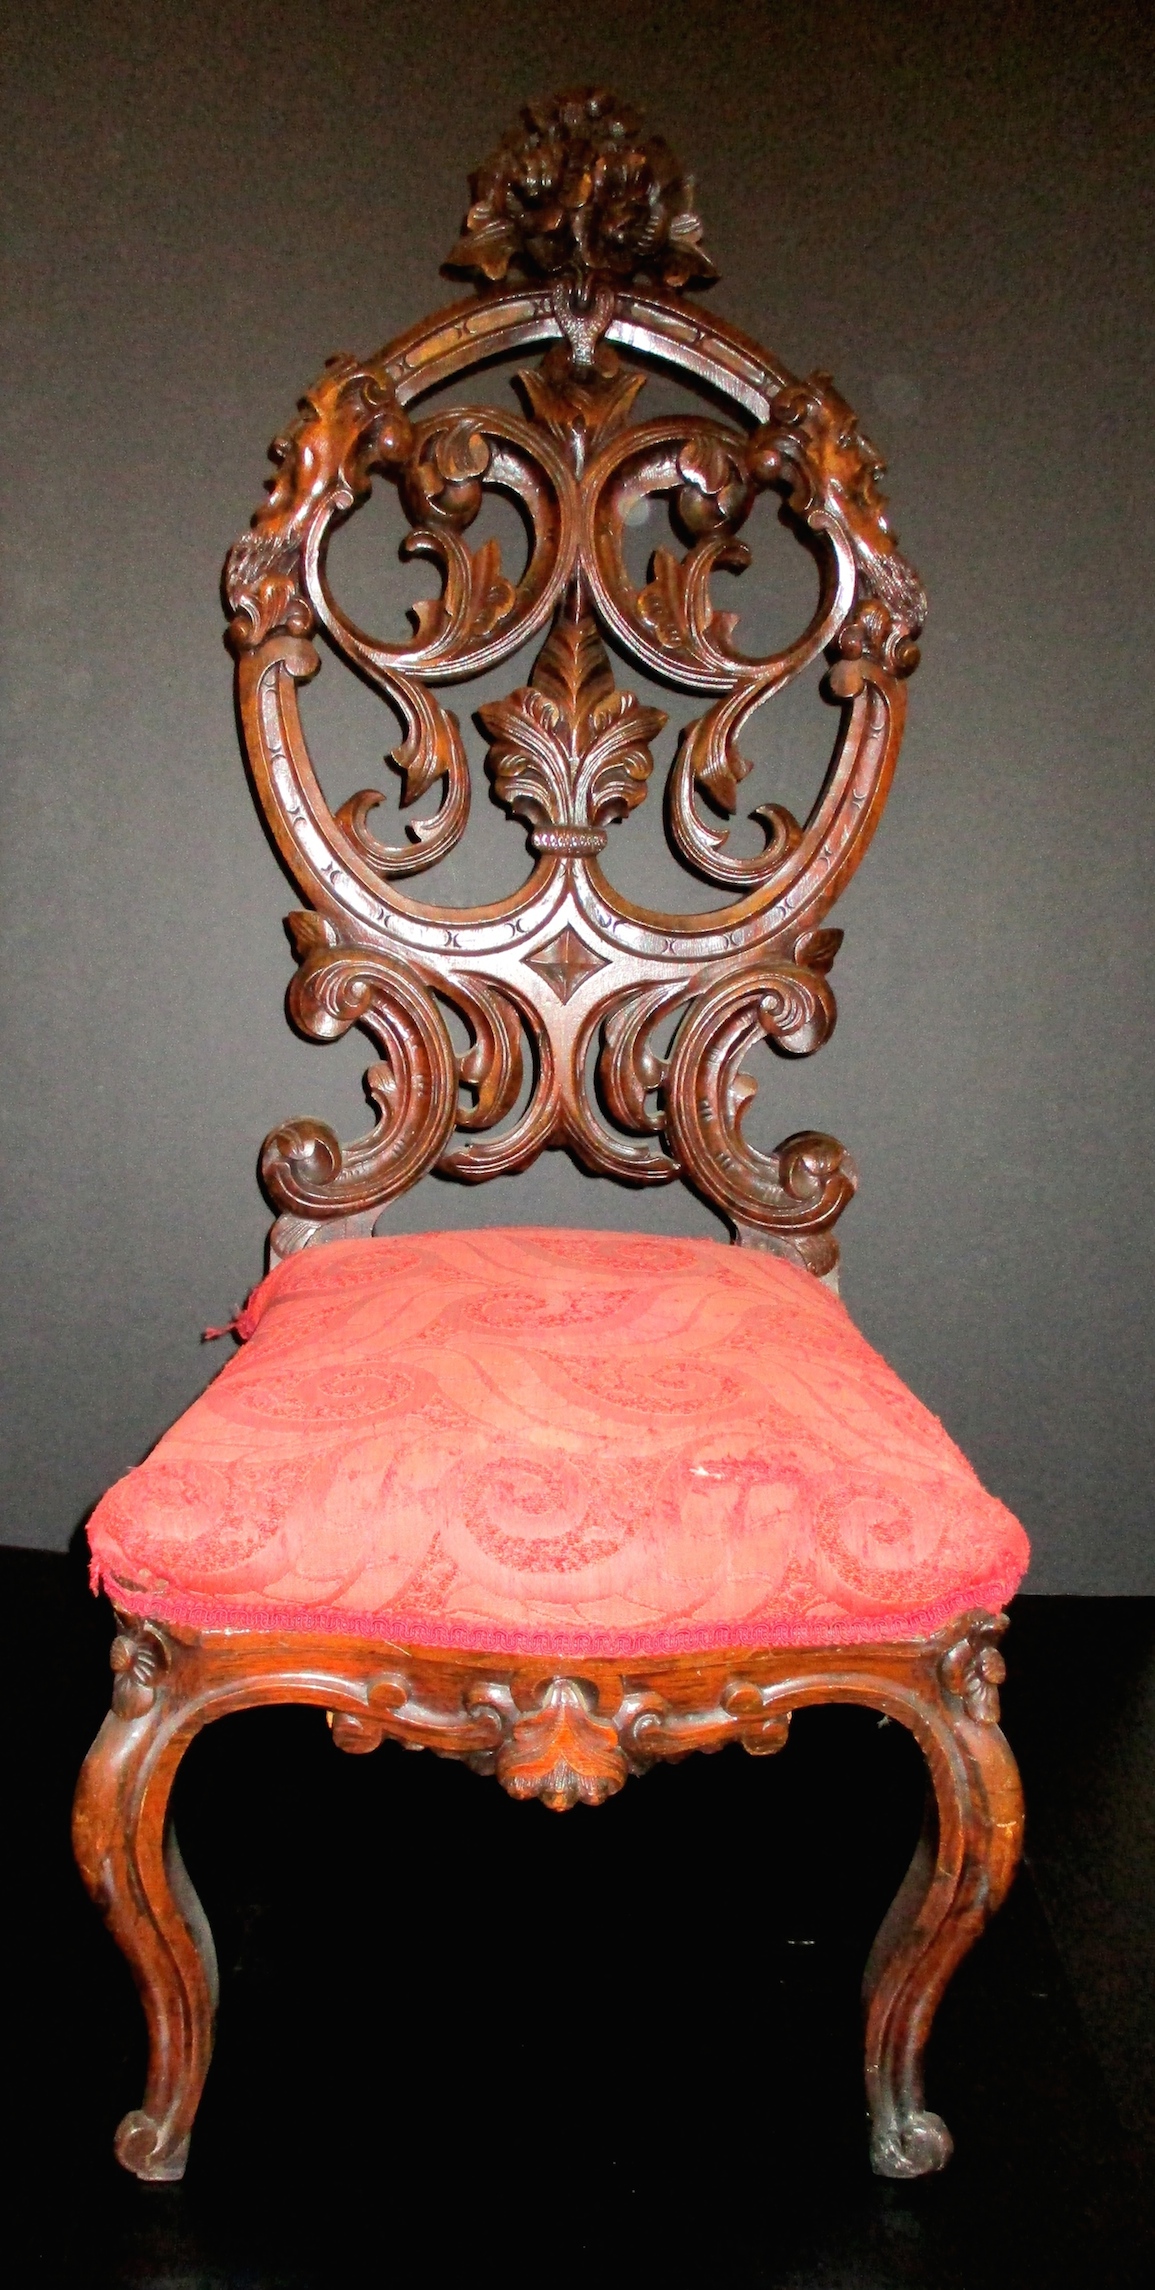 Lady's Rosewood Chair w/Carved Heads on the Sides of the Back